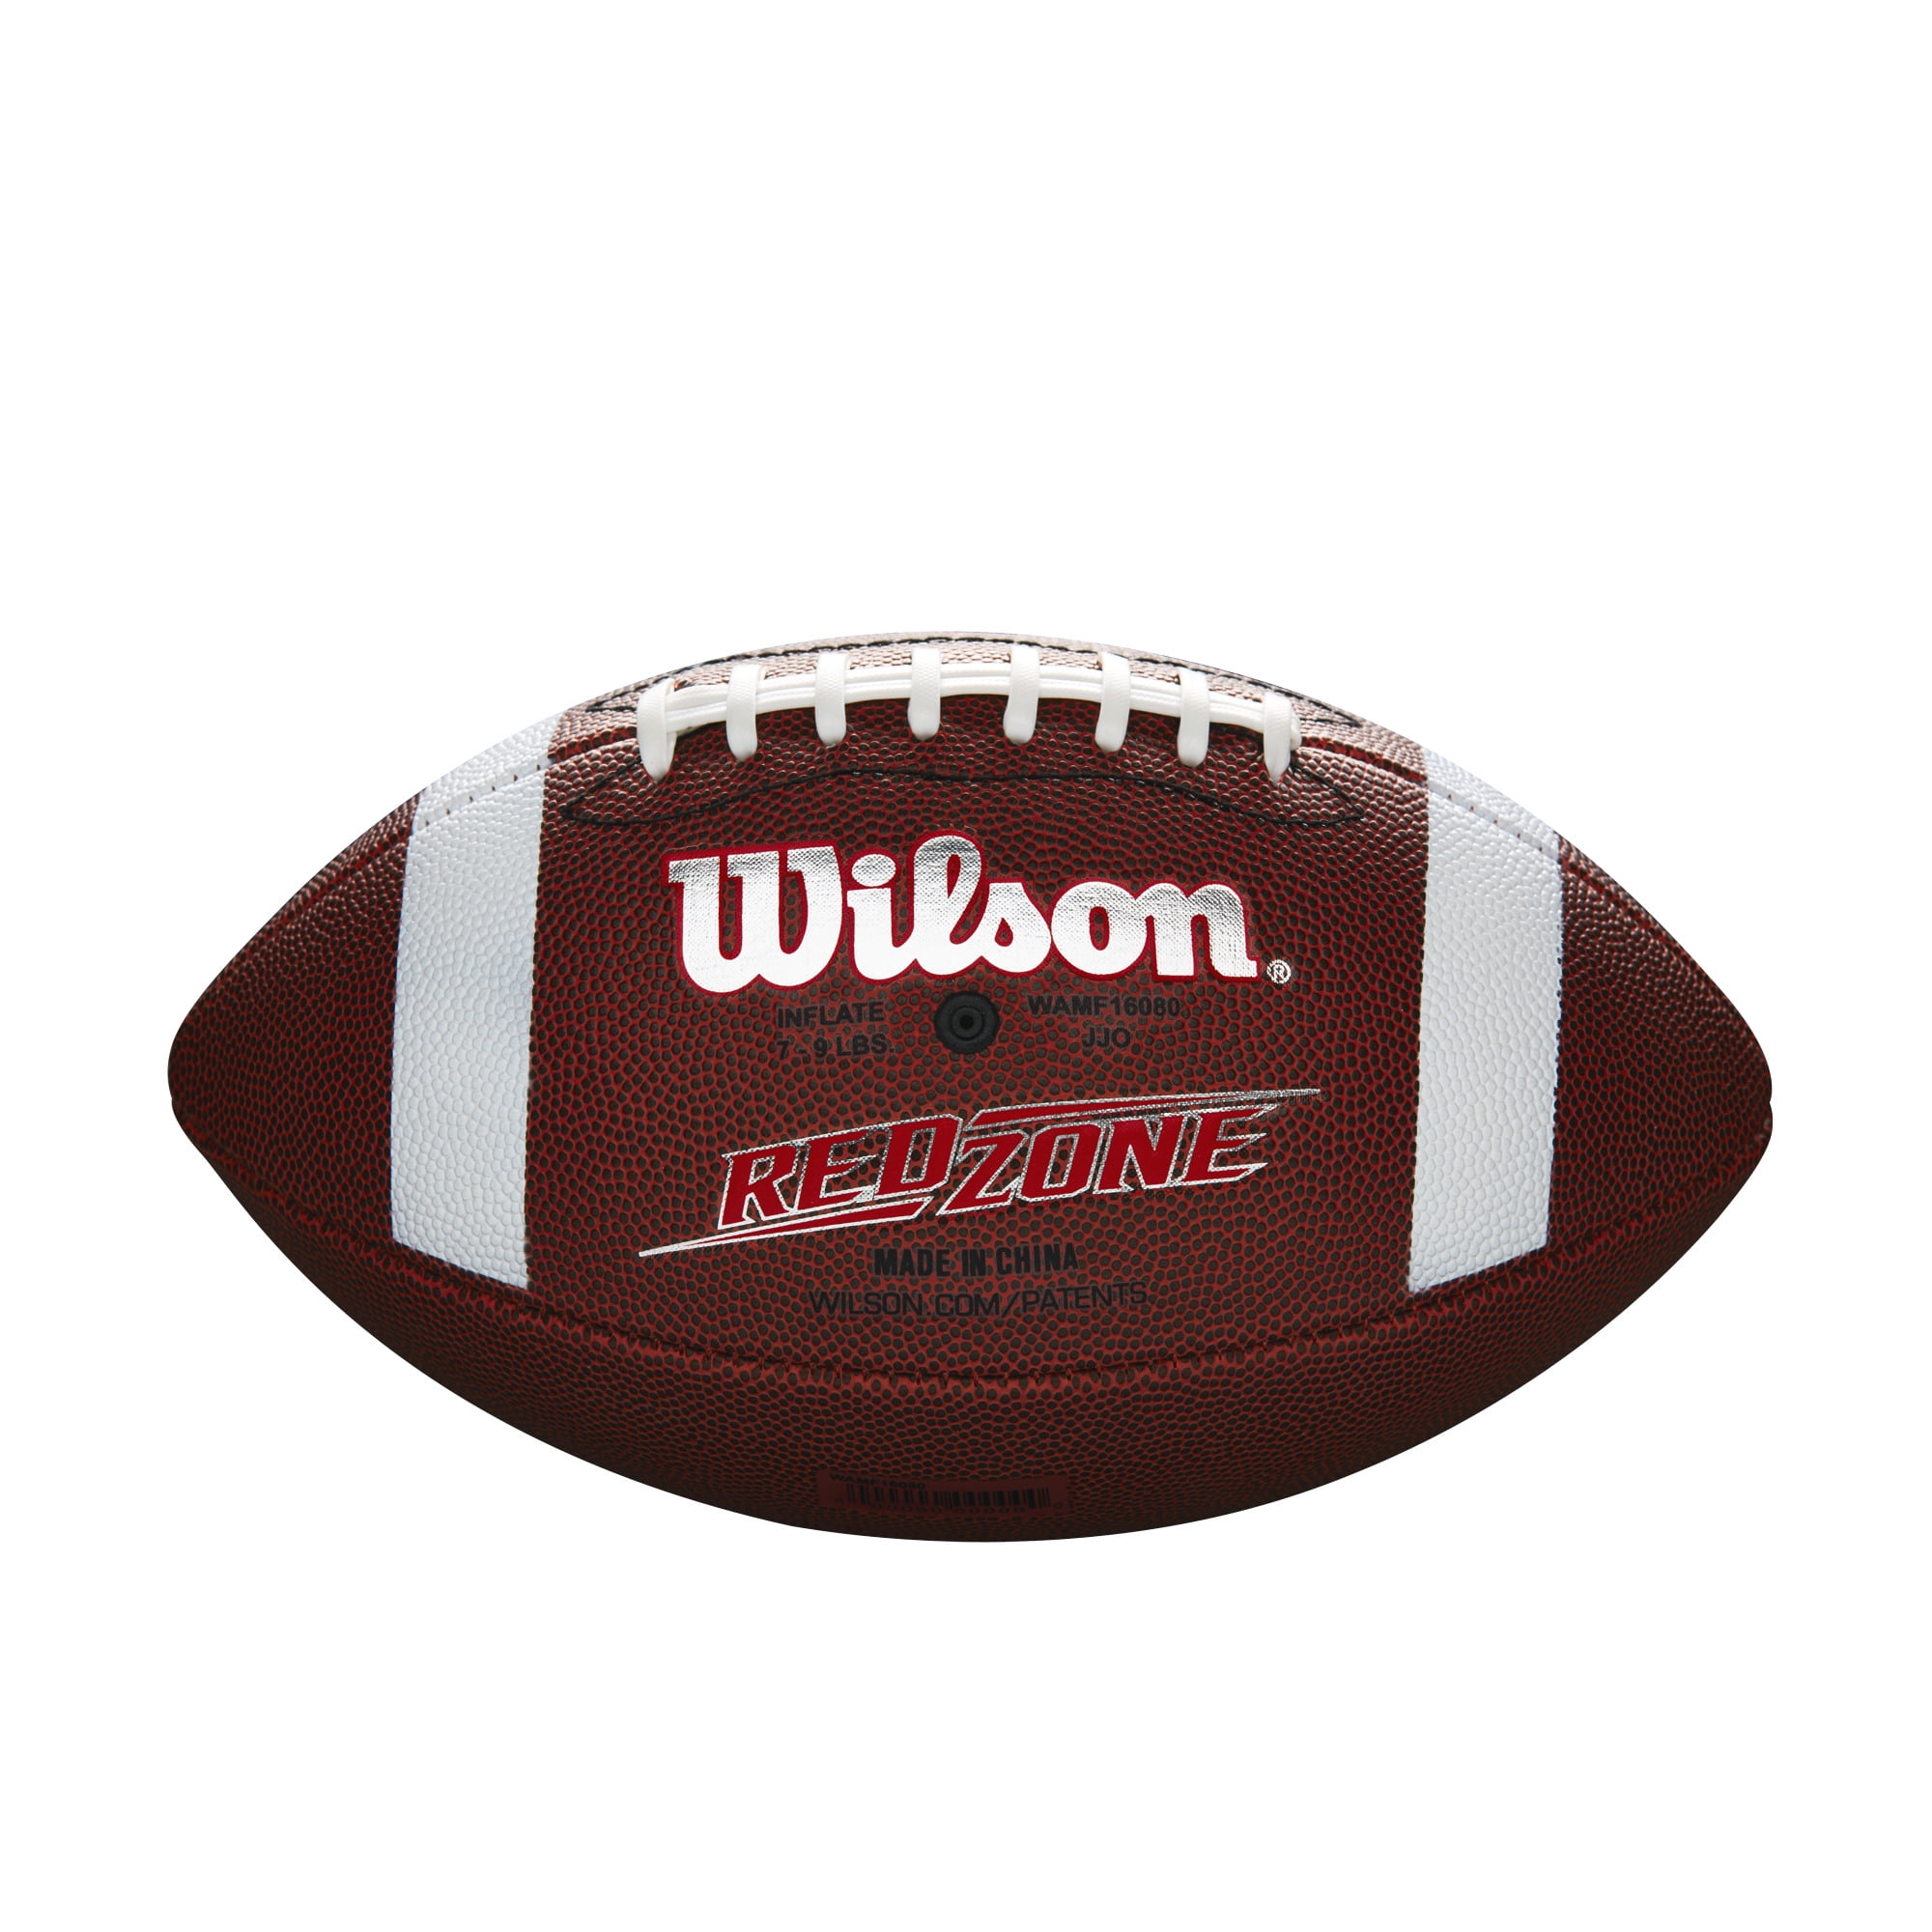 NEW KIDS NEON FOOTBALLS 4 DIFFERENT COLORS TO CHOOSE FROM FAST FREE SHIPPING 